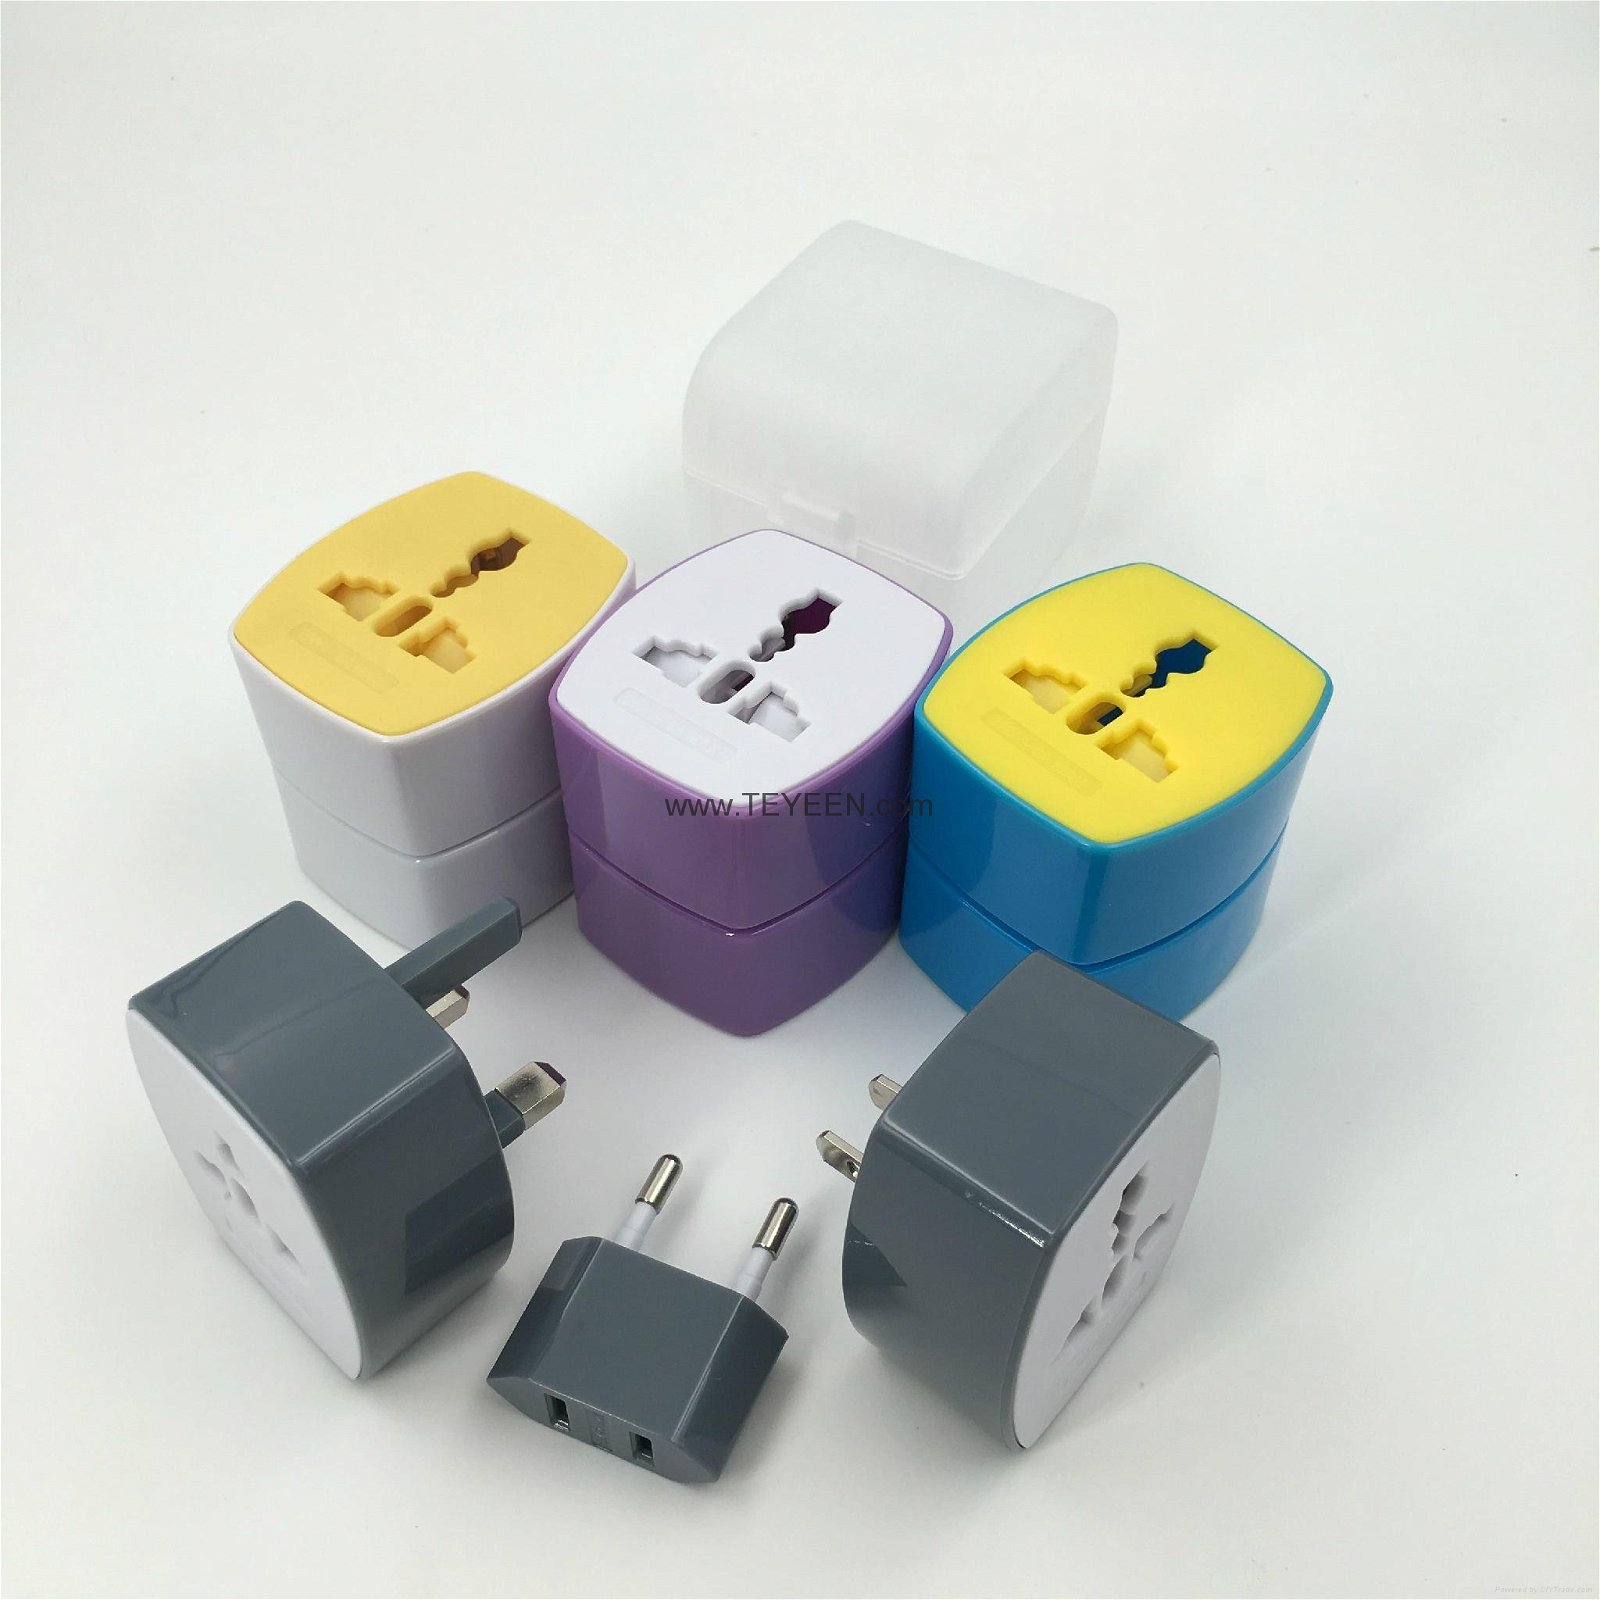 New Travel Adapter with USB Charger (DY-32U) 5